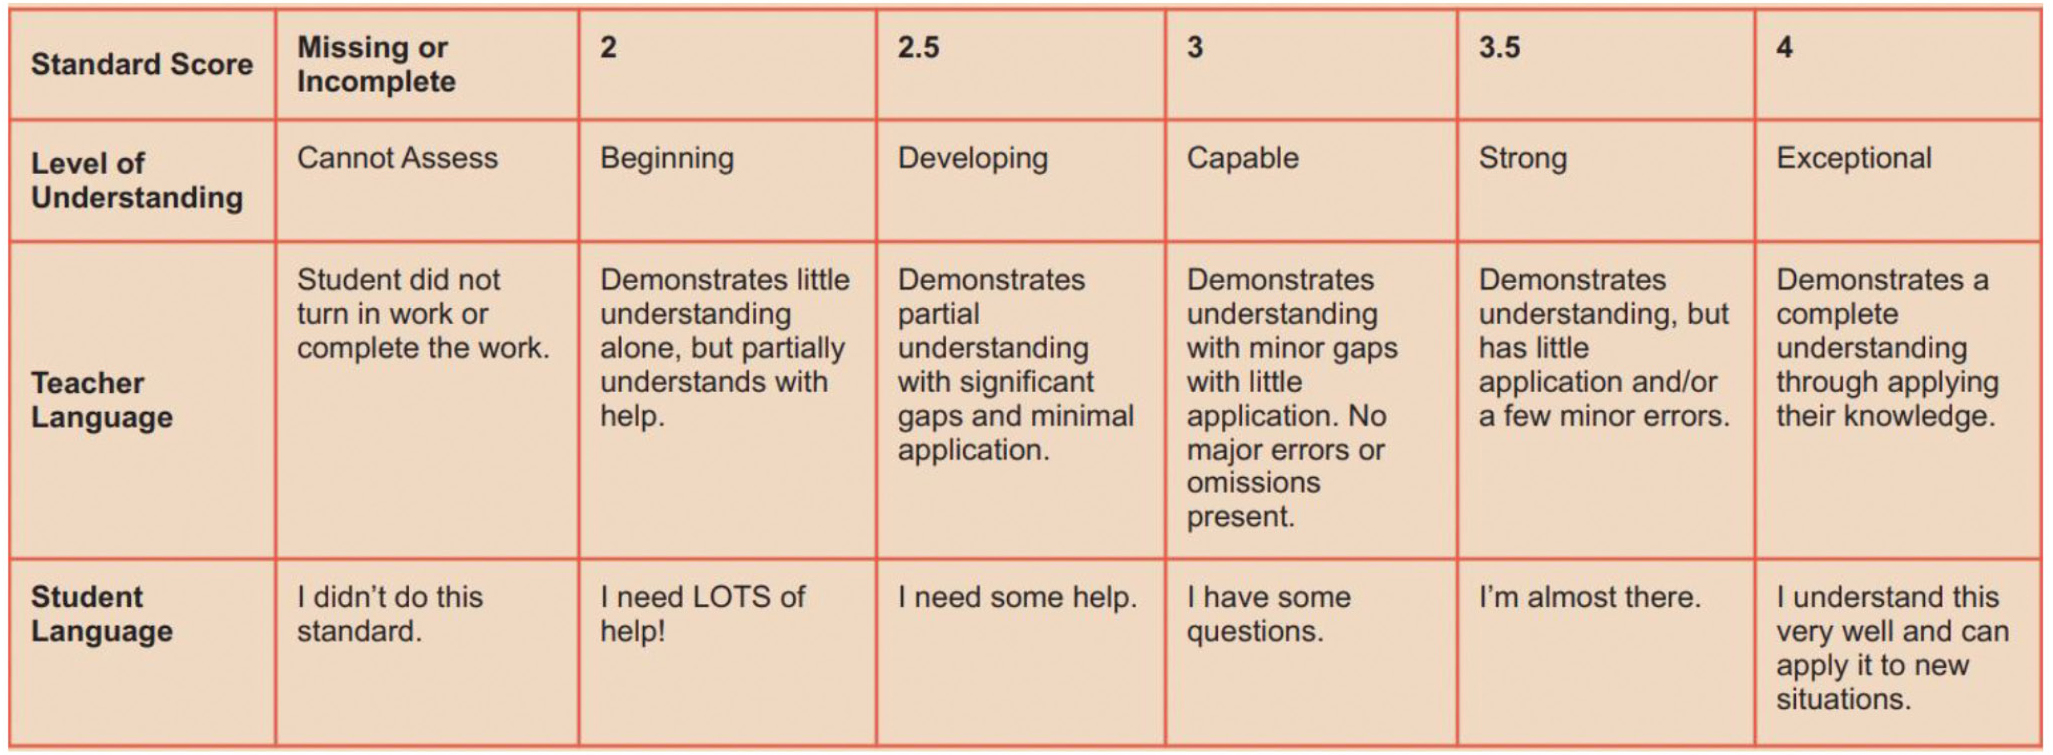 An example standards-based grading rubric.